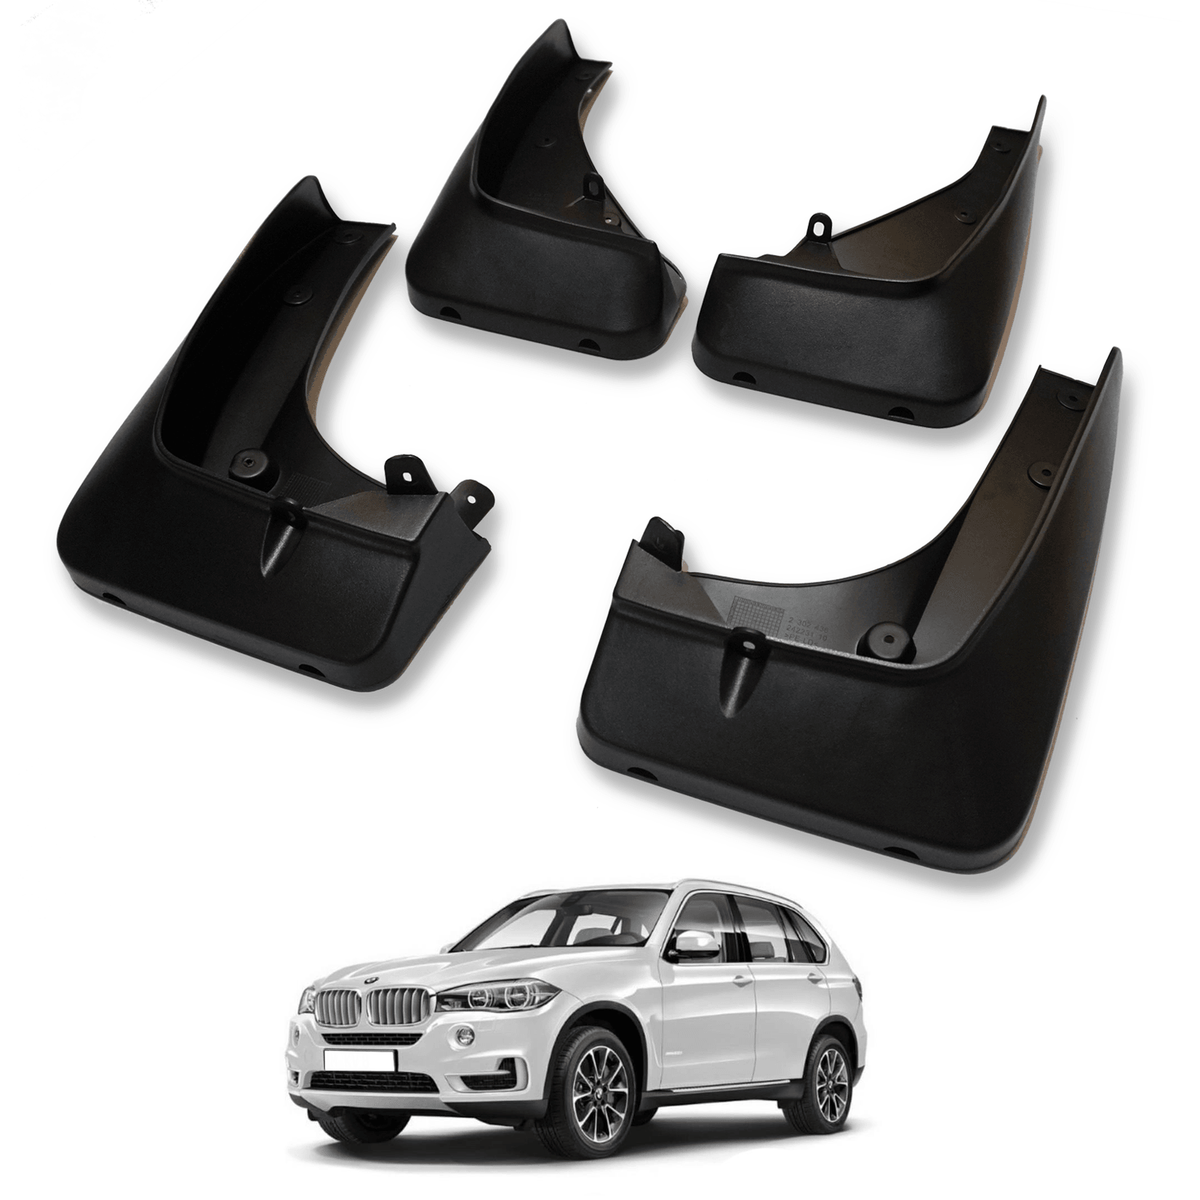 BMW X5 F15 2014-2018 OE STYLE MUD FLAP SET – FOR MODELS WITHOUT SIDE STEPS - RisperStyling